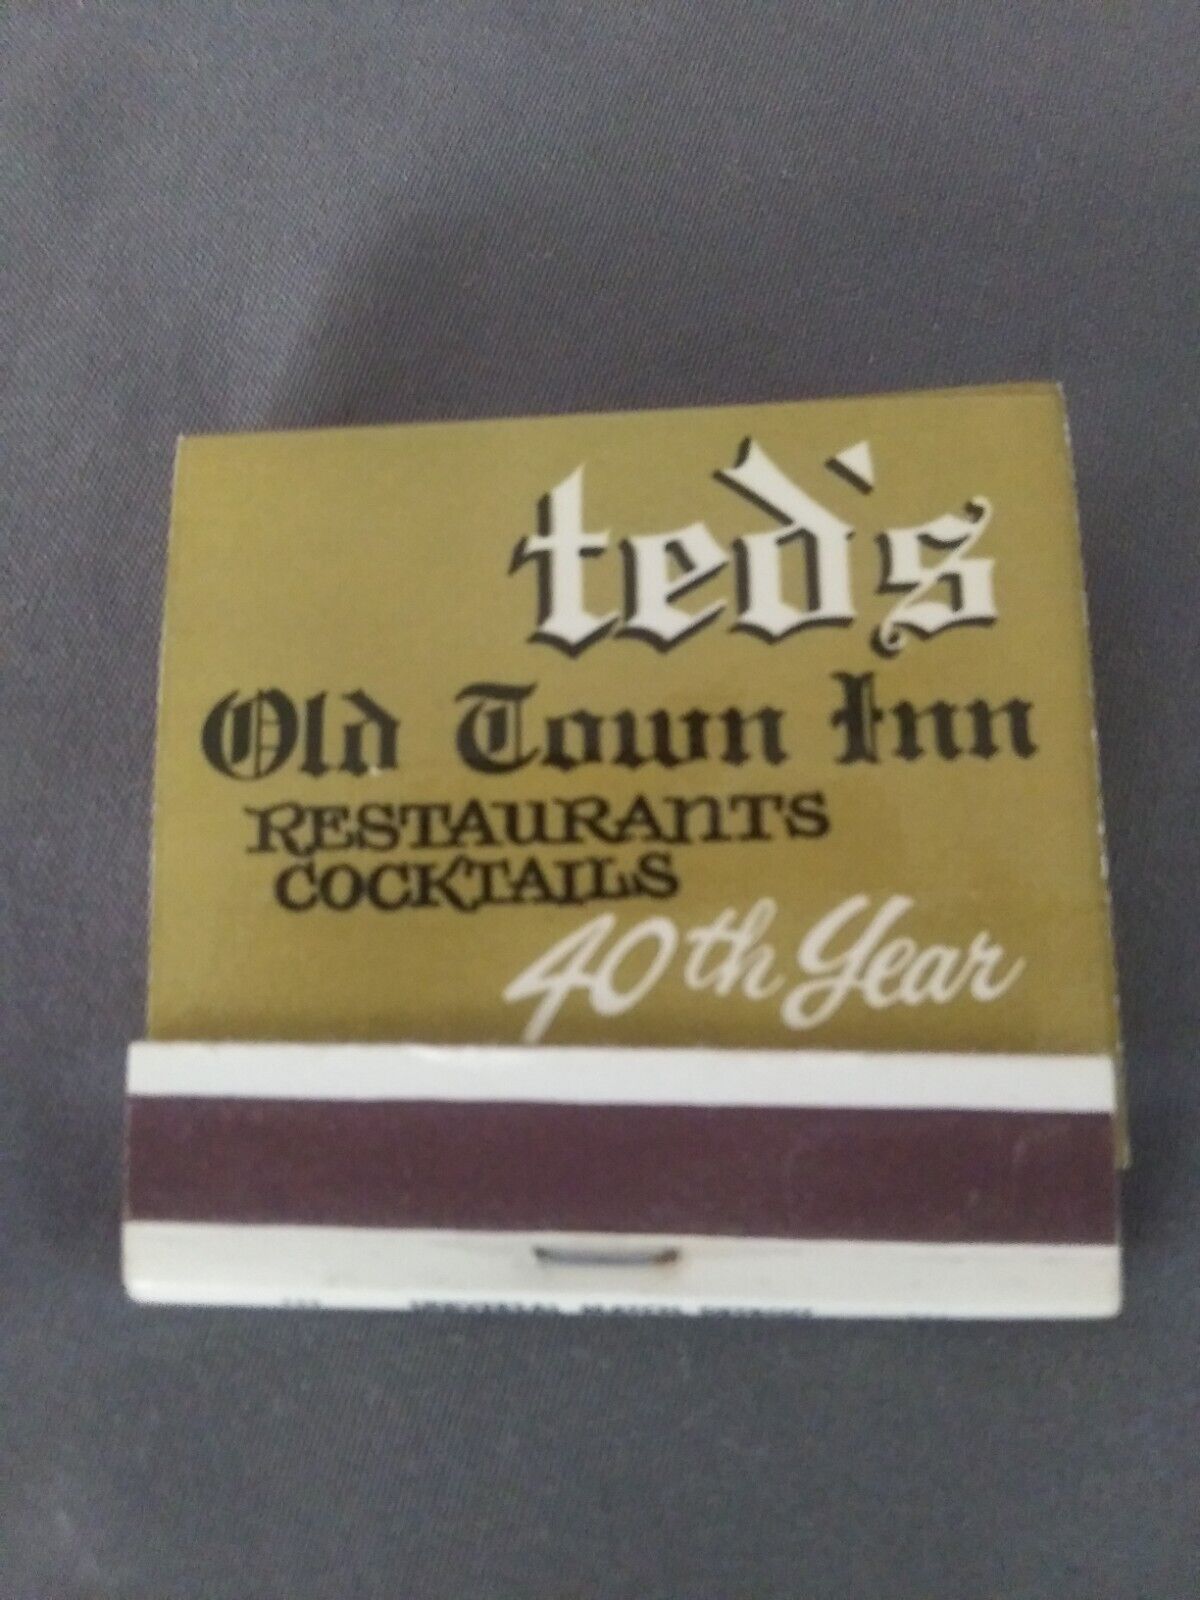 Vintage Ted's Old Town Inn Restaurant Matchbook Bloomfield Hills MI 40th year